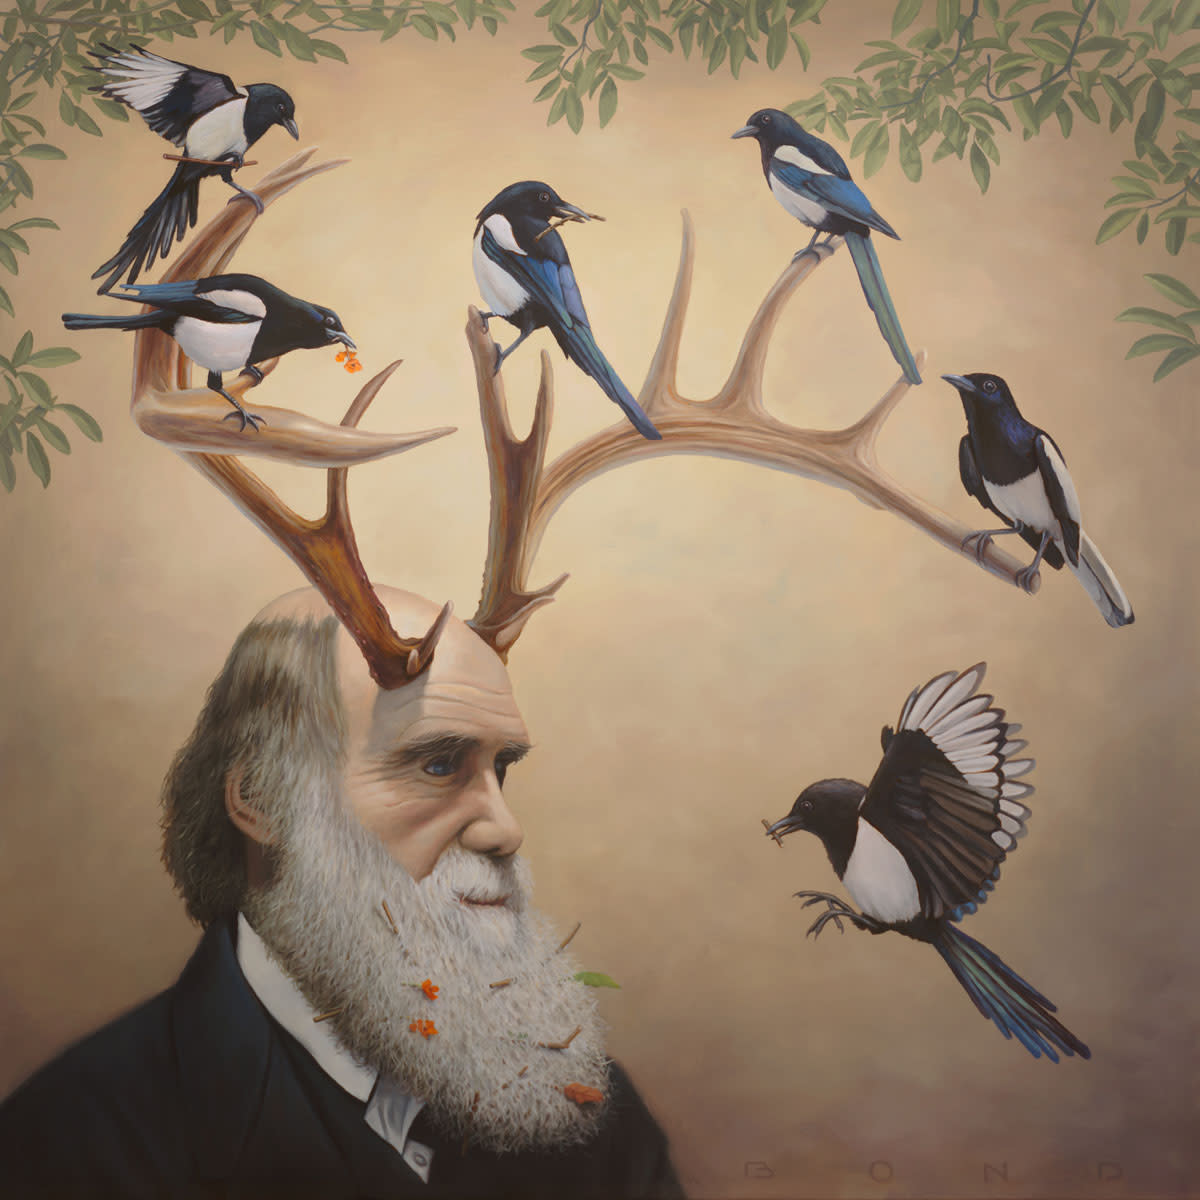 A bemused charles darwin adorned by six magpies oyqki8